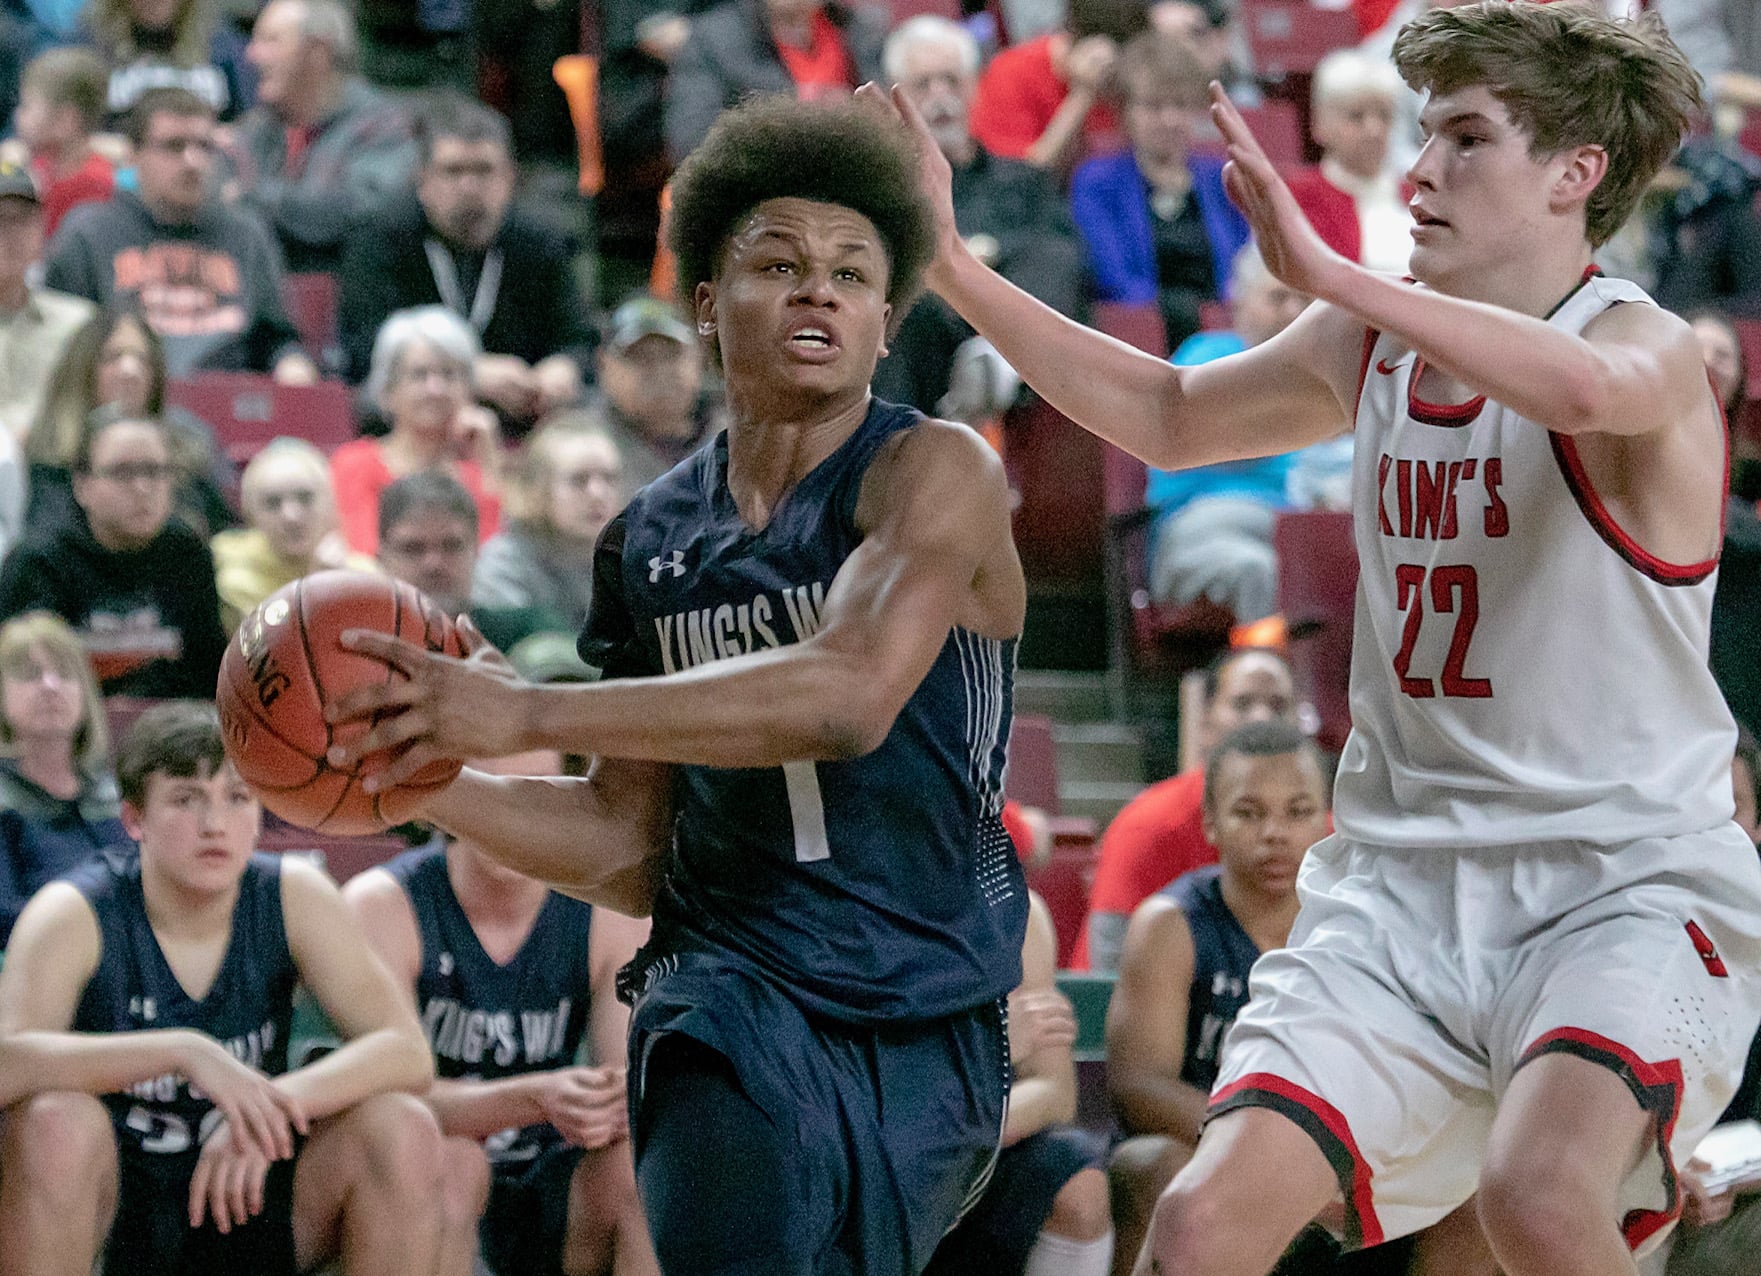 King's Way's Khalfani Cason (1), drives toward the hoop against King's Knights' Nate Kleppe (22), during the WIAA 1A boys state tournament on Friday, Mar. 1, 2019, at the Yakima Valley SunDome. King's Way Knights defeated King's Knights 43-42.